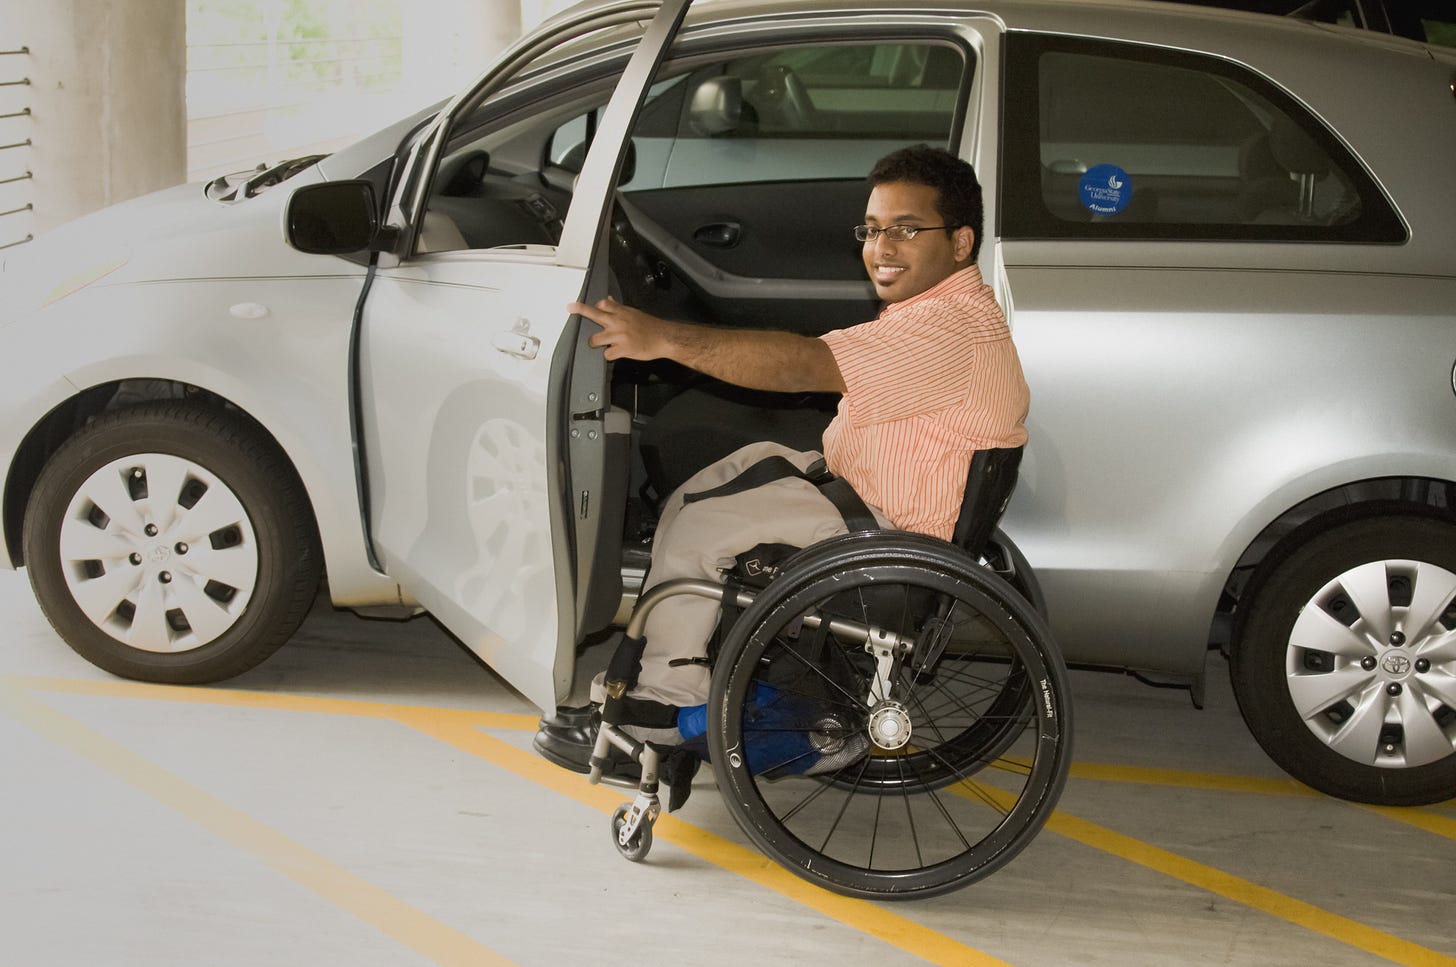 a Black man wheelchair user is wearing an orange and white striped shirt and tan trousers. He is facing the camera and grinning as he holds a car door open. The car is silver and parked next to yellow lines.